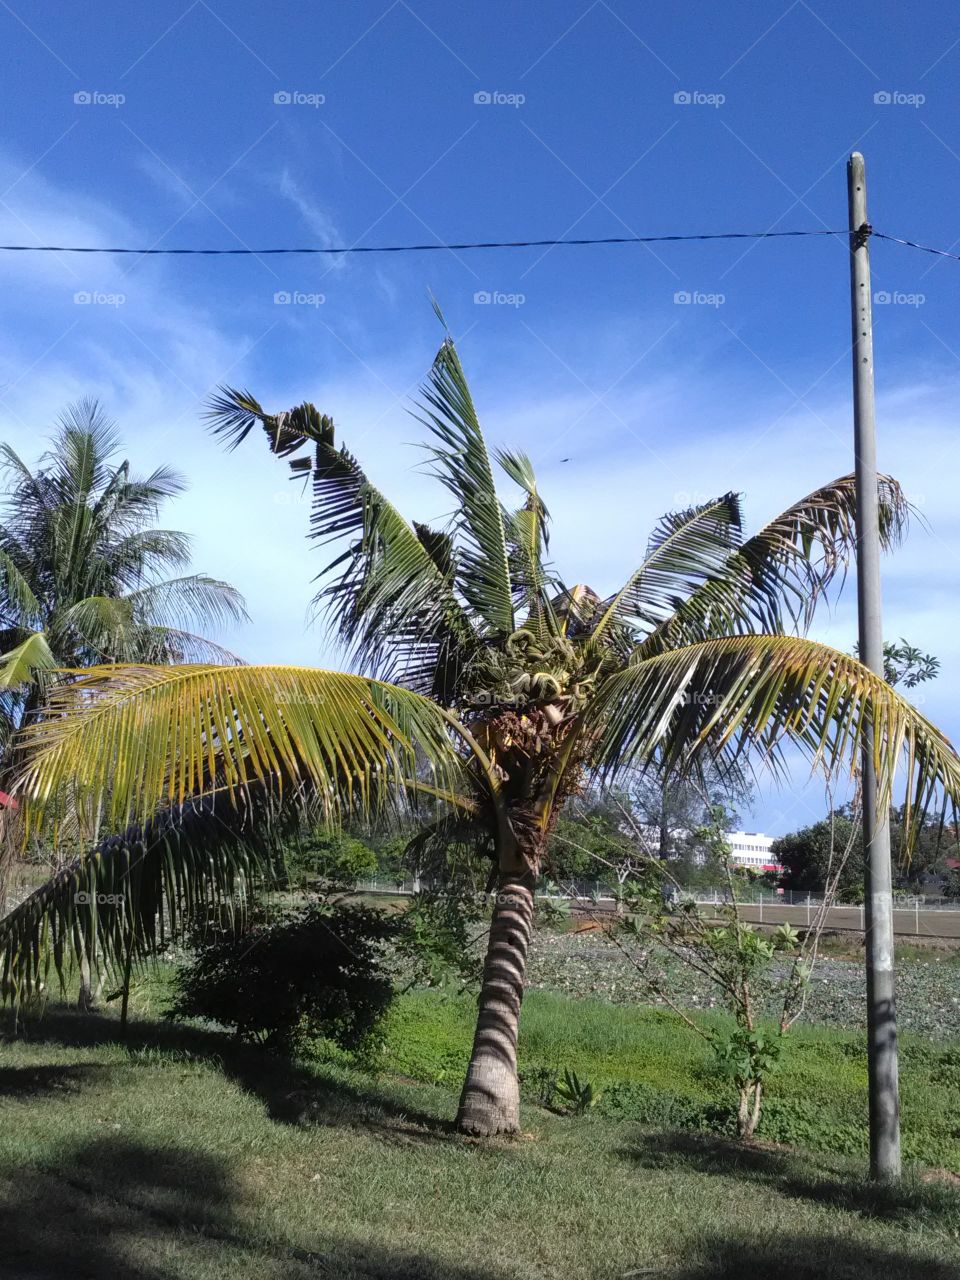 Up close coconut tree refuses to grow normal instead trying to be popular